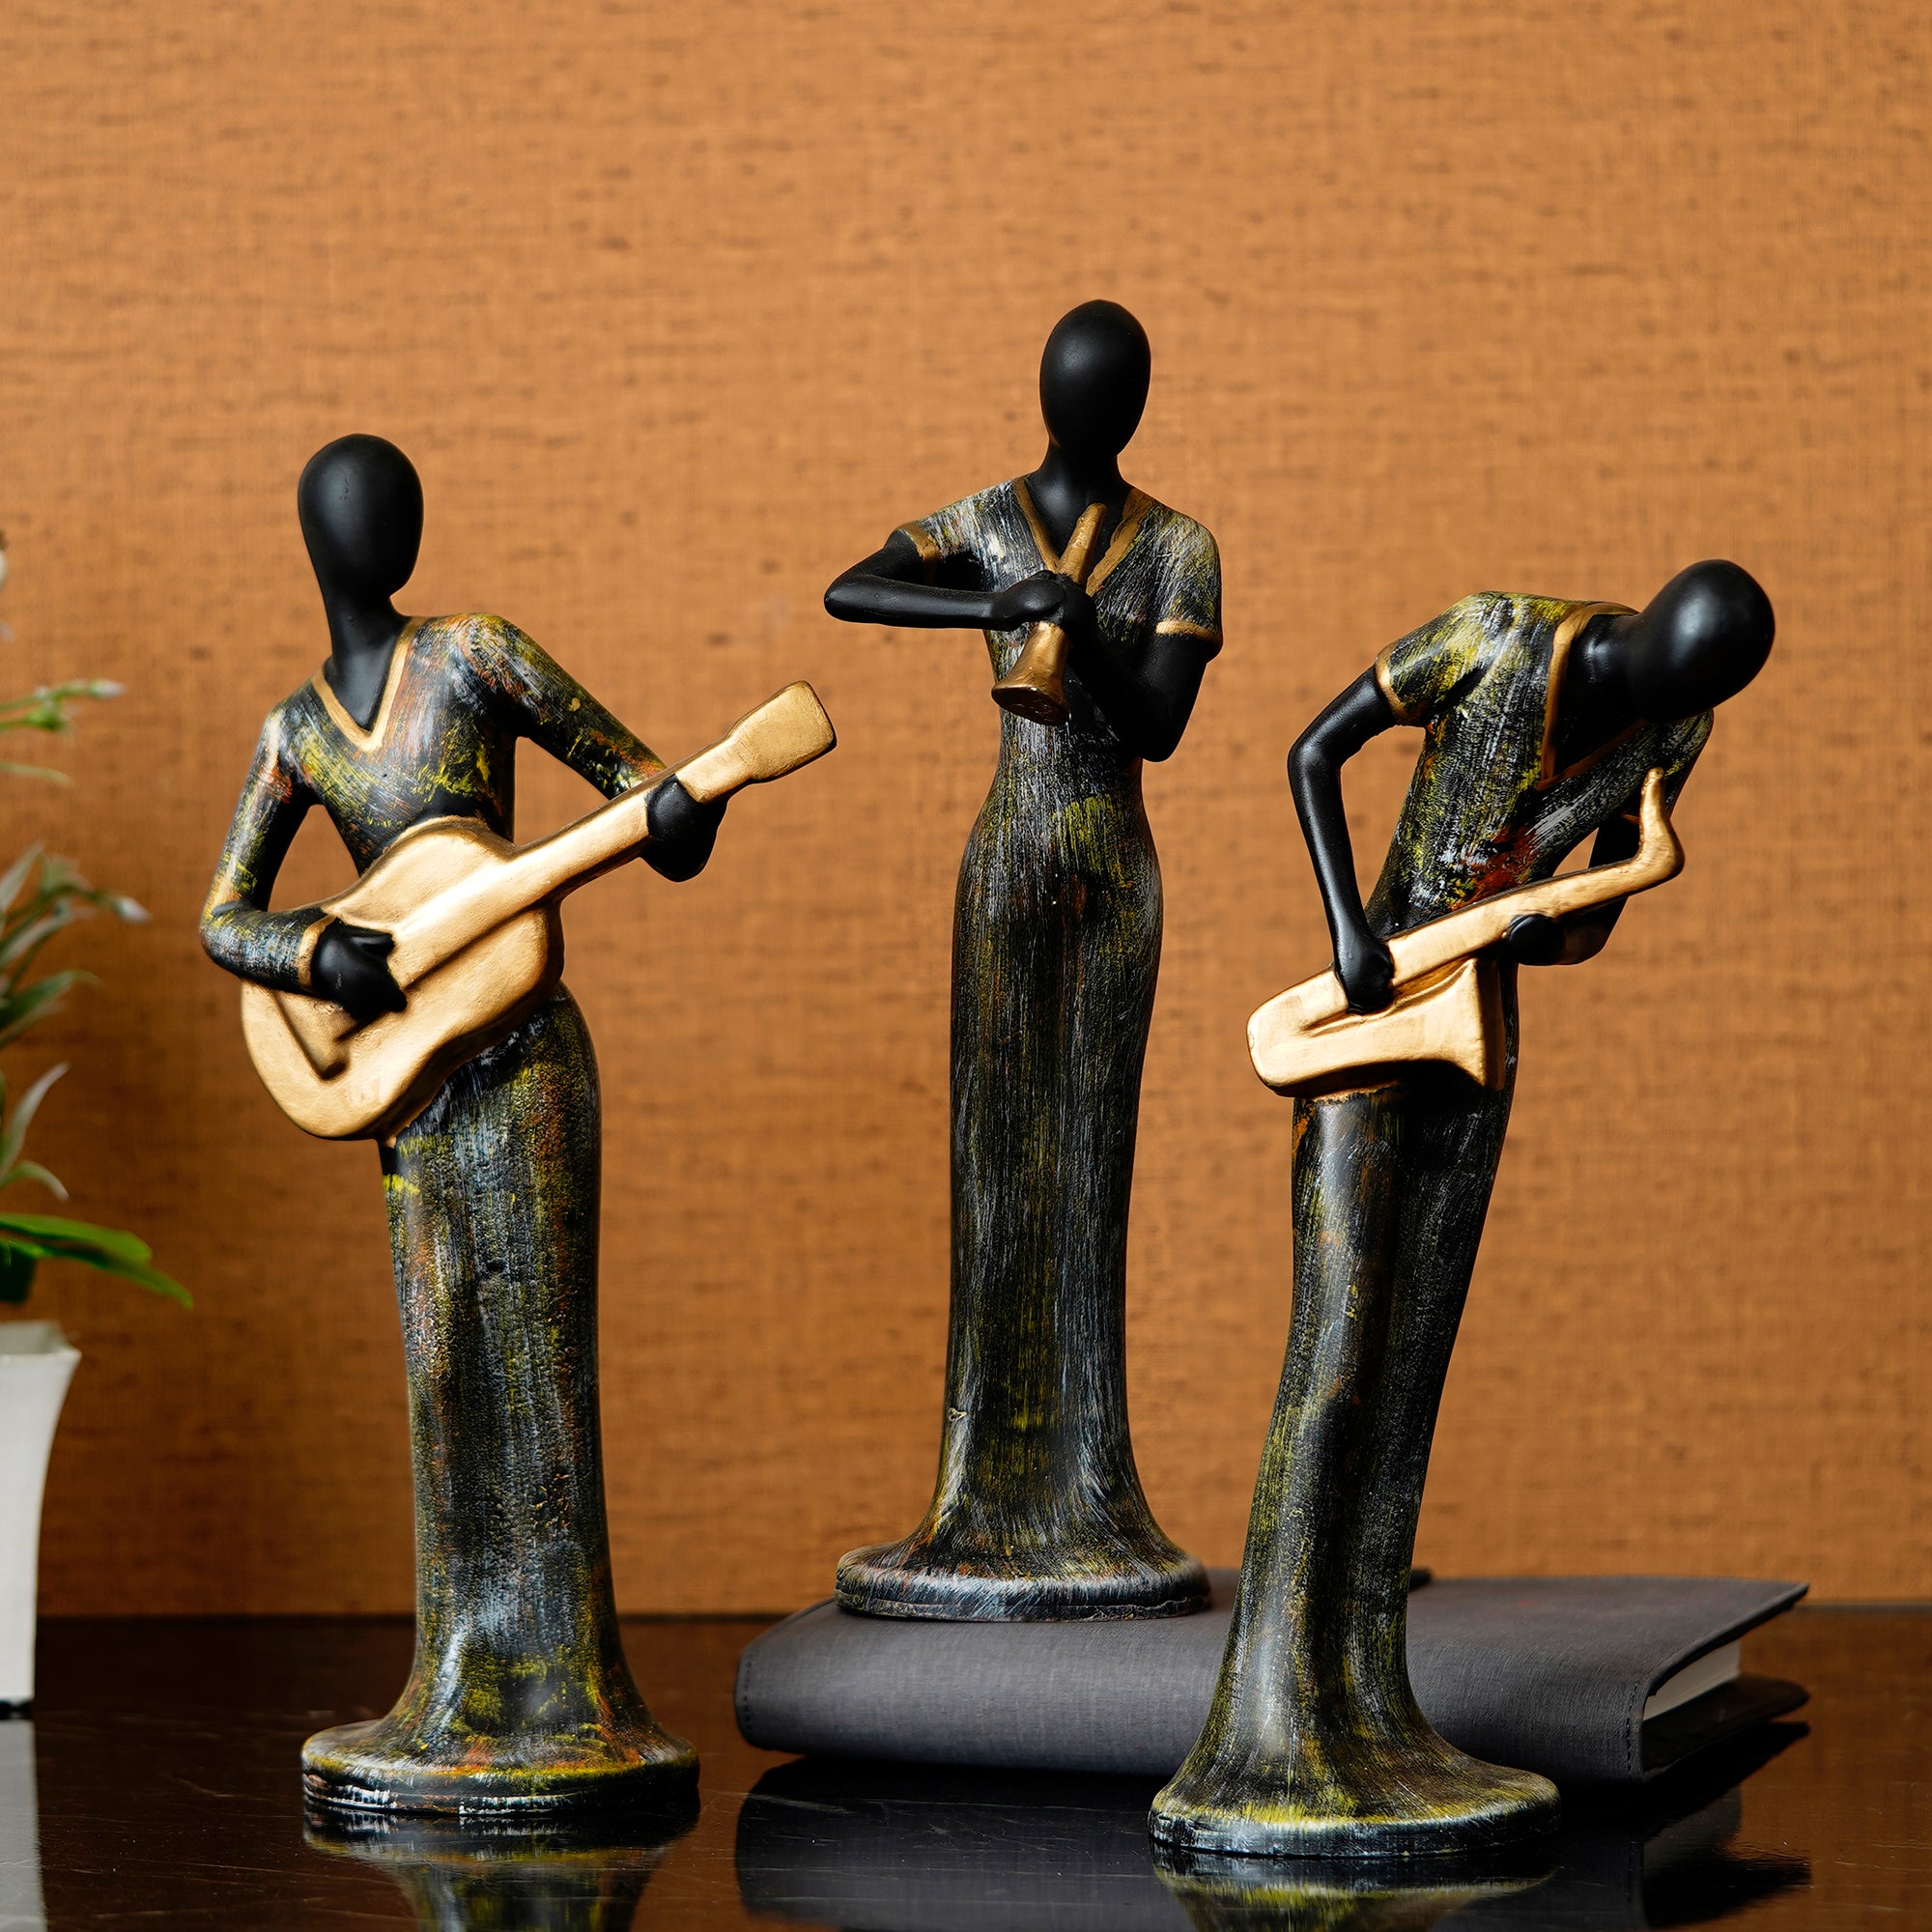 Grey and Black Polyresin Set of 3 Ladies figurines Playing Guitar, Clarinet, Saxophone Musical Instrument Handcrafted Decorative Showpiece